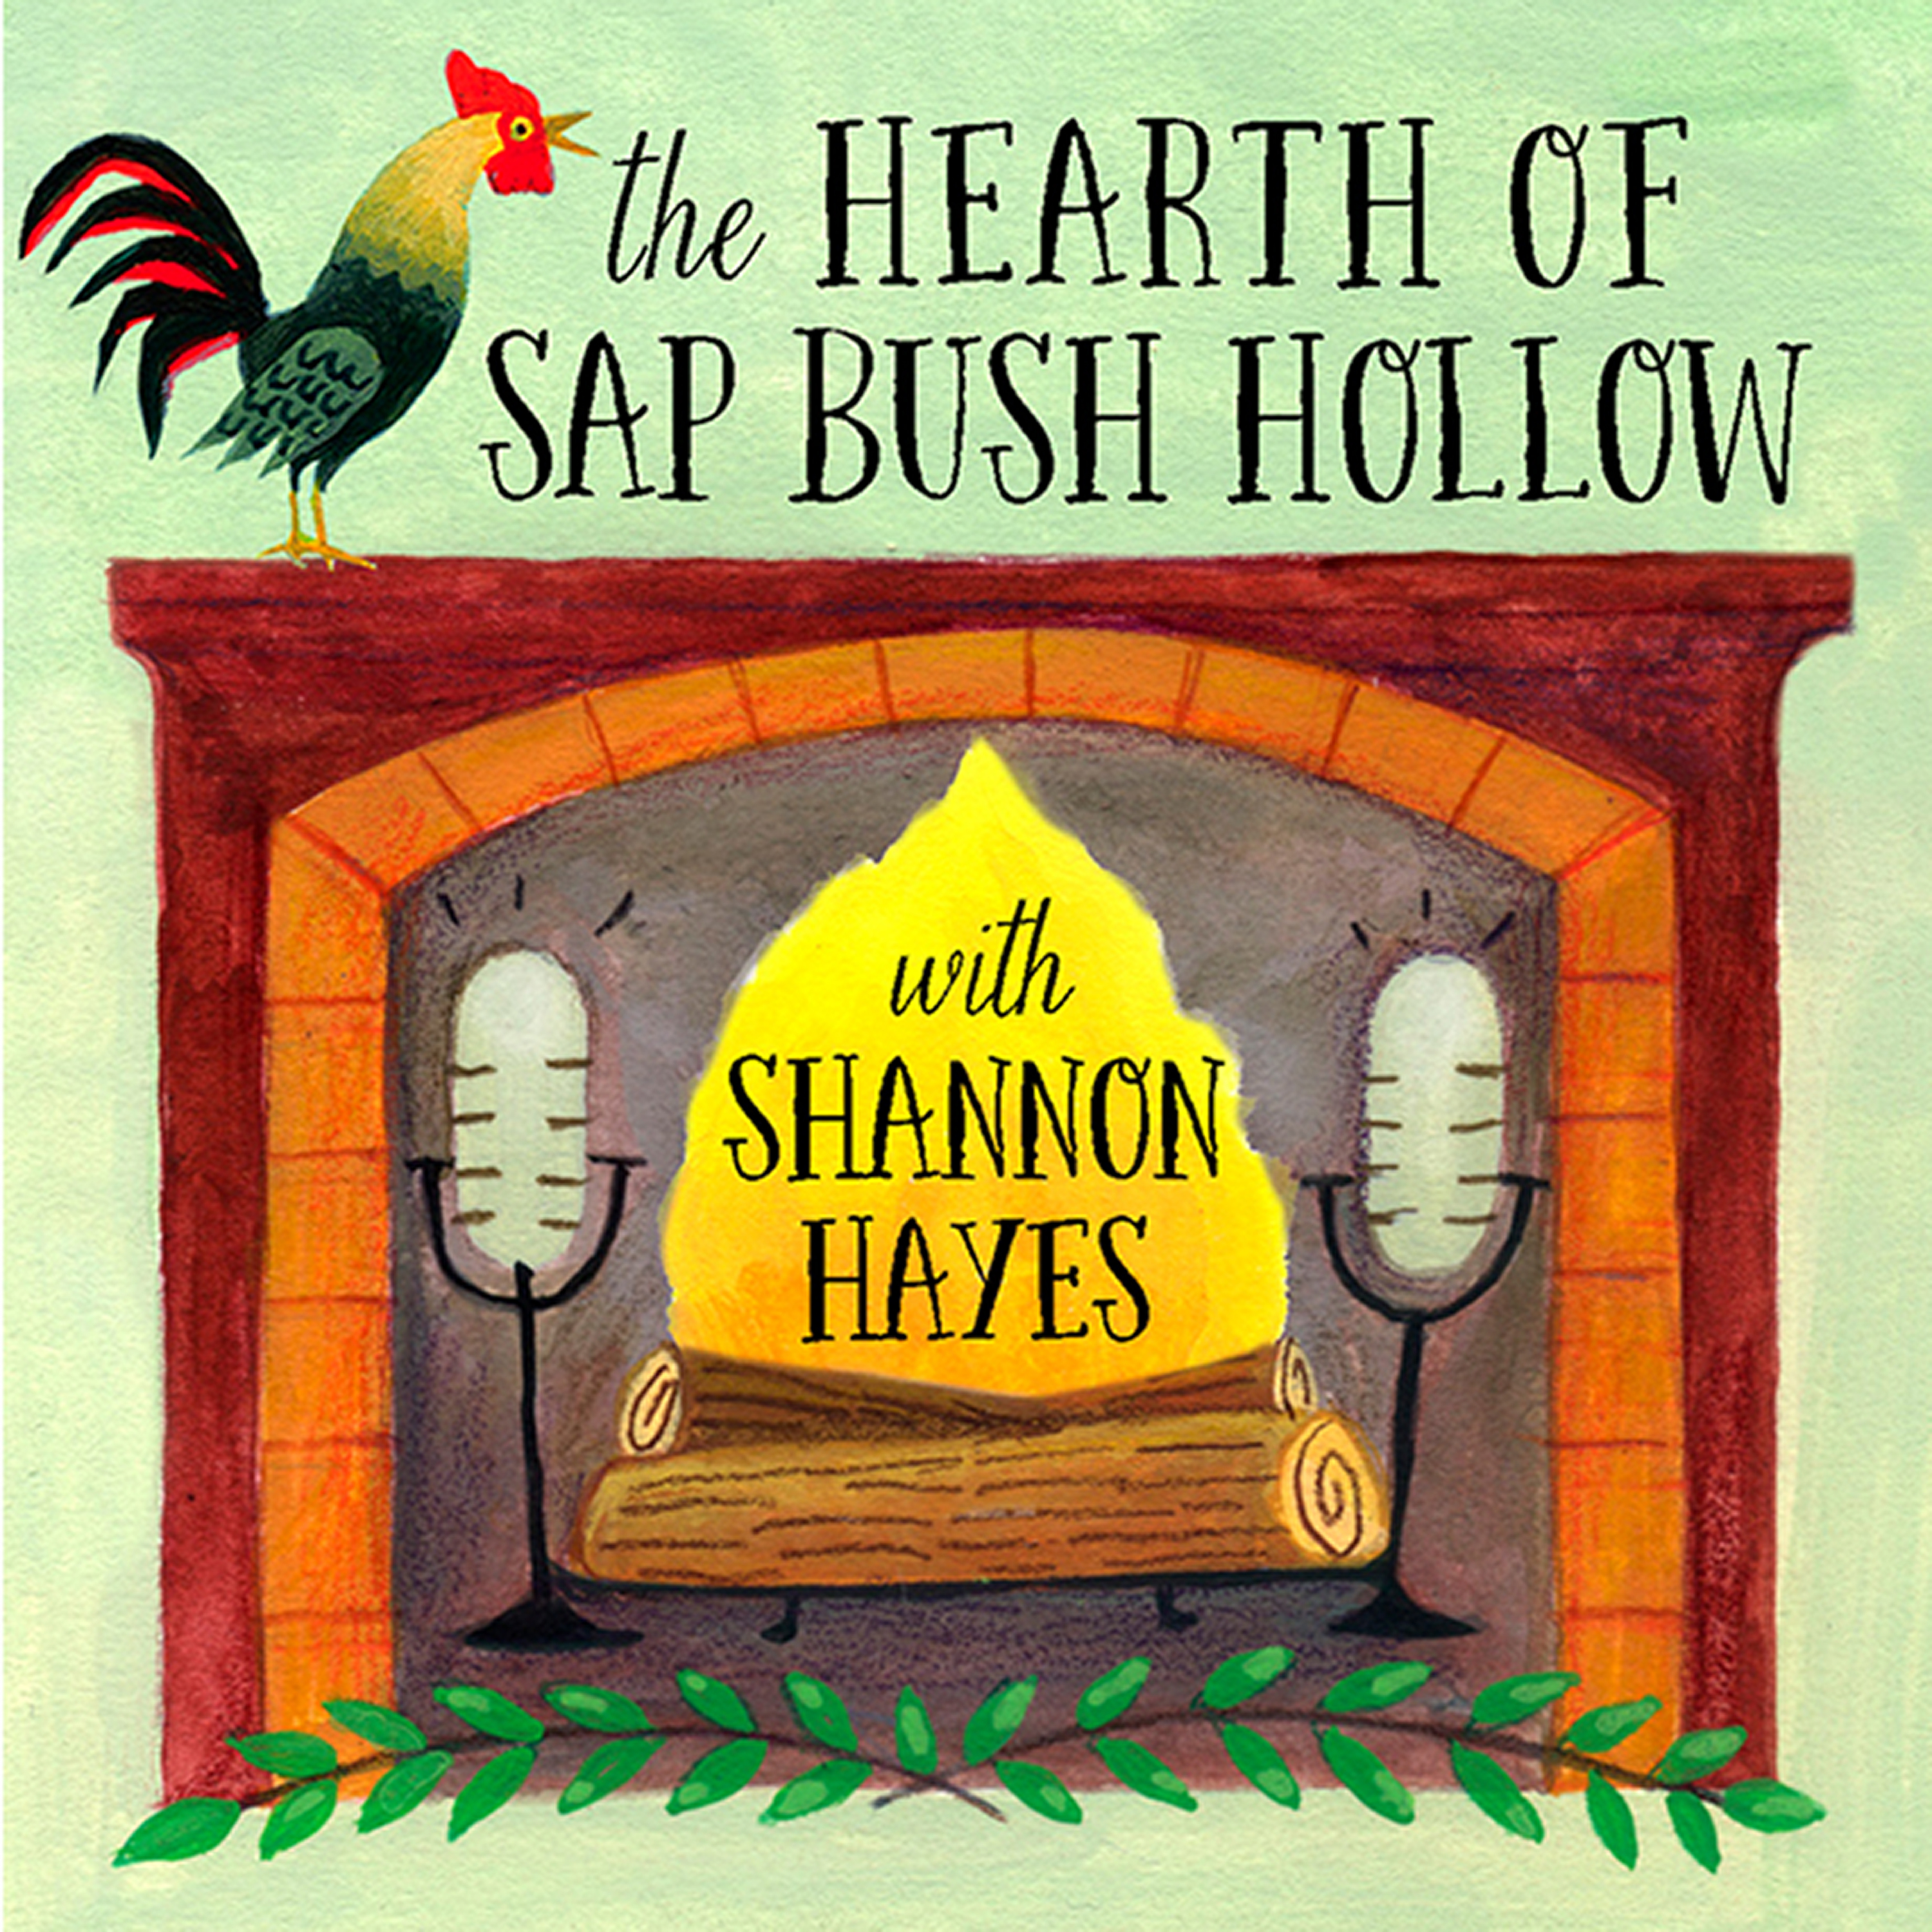 The Hearth of Sap  Bush Hollow temporarily paused